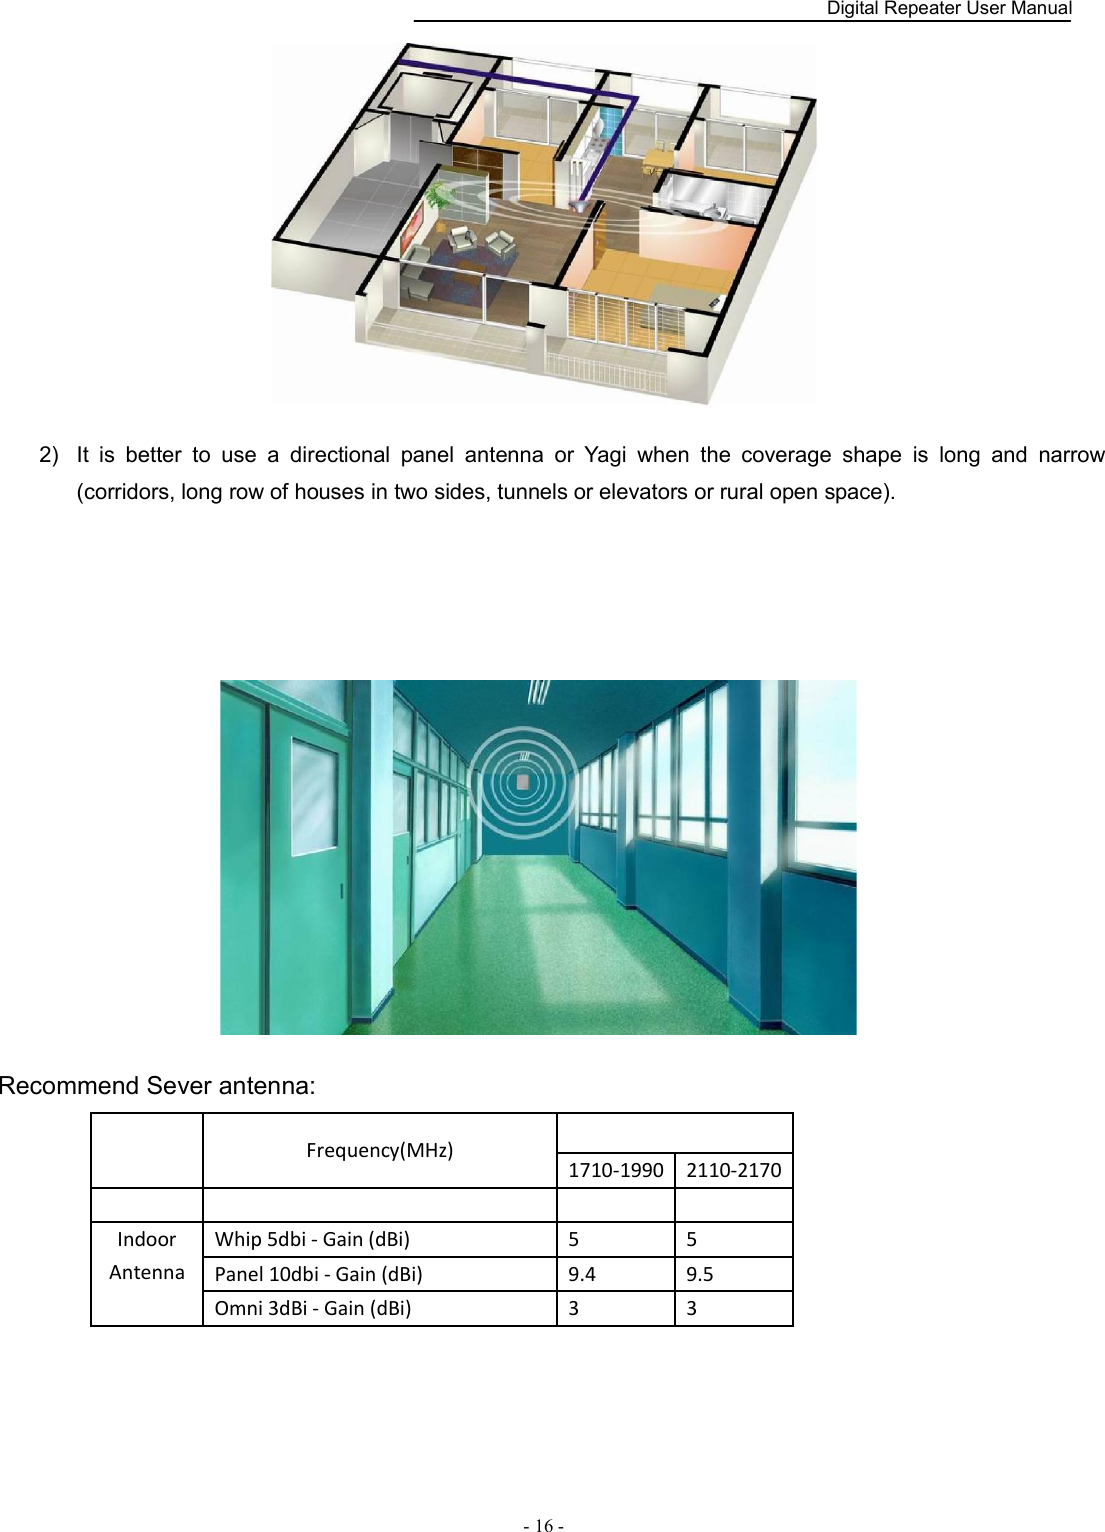    Digital Repeater User Manual  - 16 -    2)  It  is  better  to  use  a  directional  panel  antenna  or  Yagi  when  the  coverage  shape  is  long  and  narrow (corridors, long row of houses in two sides, tunnels or elevators or rural open space).     Recommend Sever antenna:   Frequency(MHz)   1710-1990 2110-2170         Indoor Antenna Whip 5dbi - Gain (dBi)  5  5 Panel 10dbi - Gain (dBi)  9.4  9.5 Omni 3dBi - Gain (dBi)  3  3  